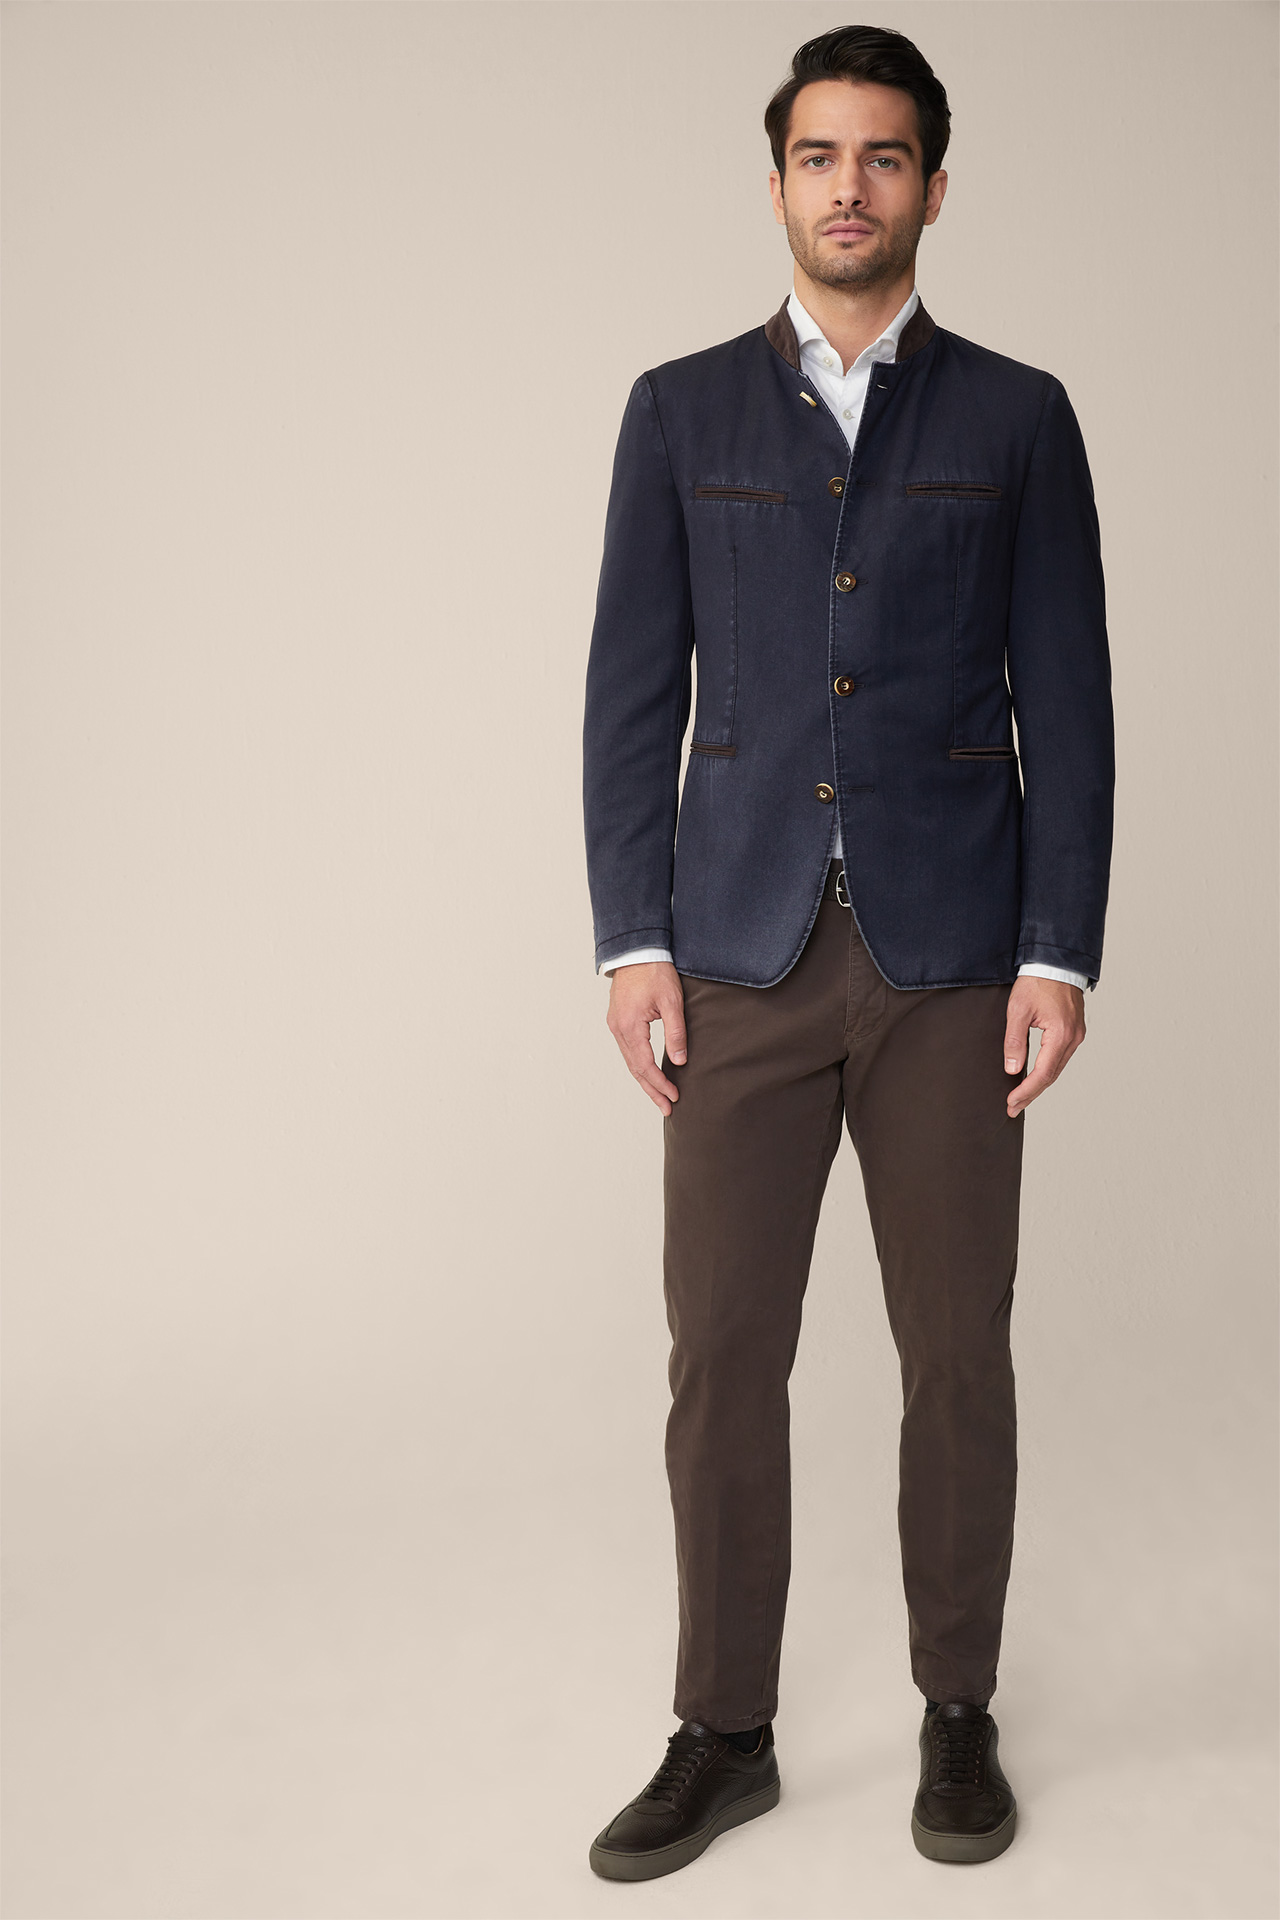 Frosted Wool Traditional Schwabing Cardigan-style Jacket in Flecked Navy